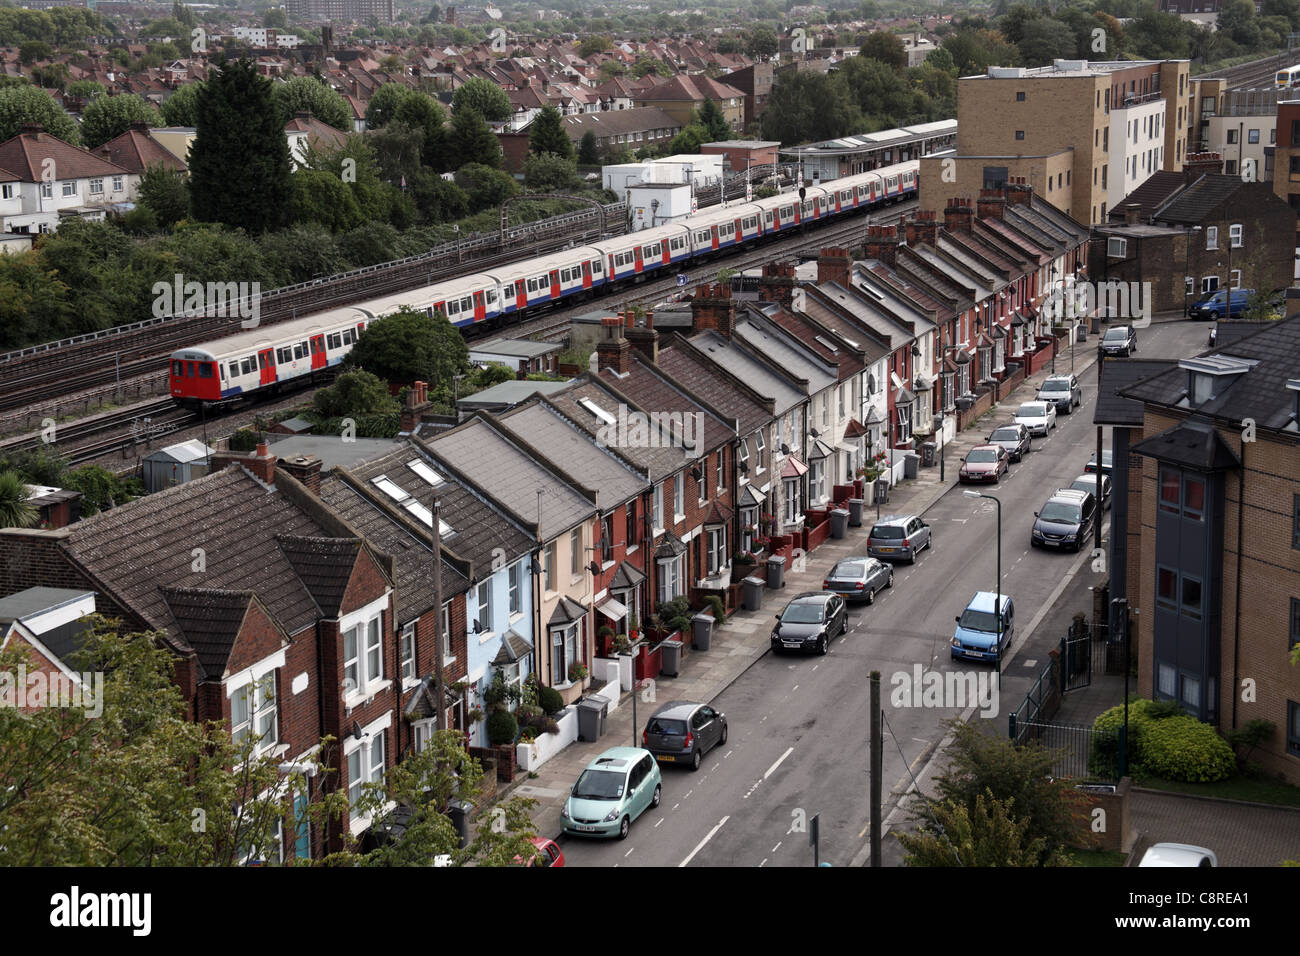 Terraced Housing in Willesden, North London Stock Photo